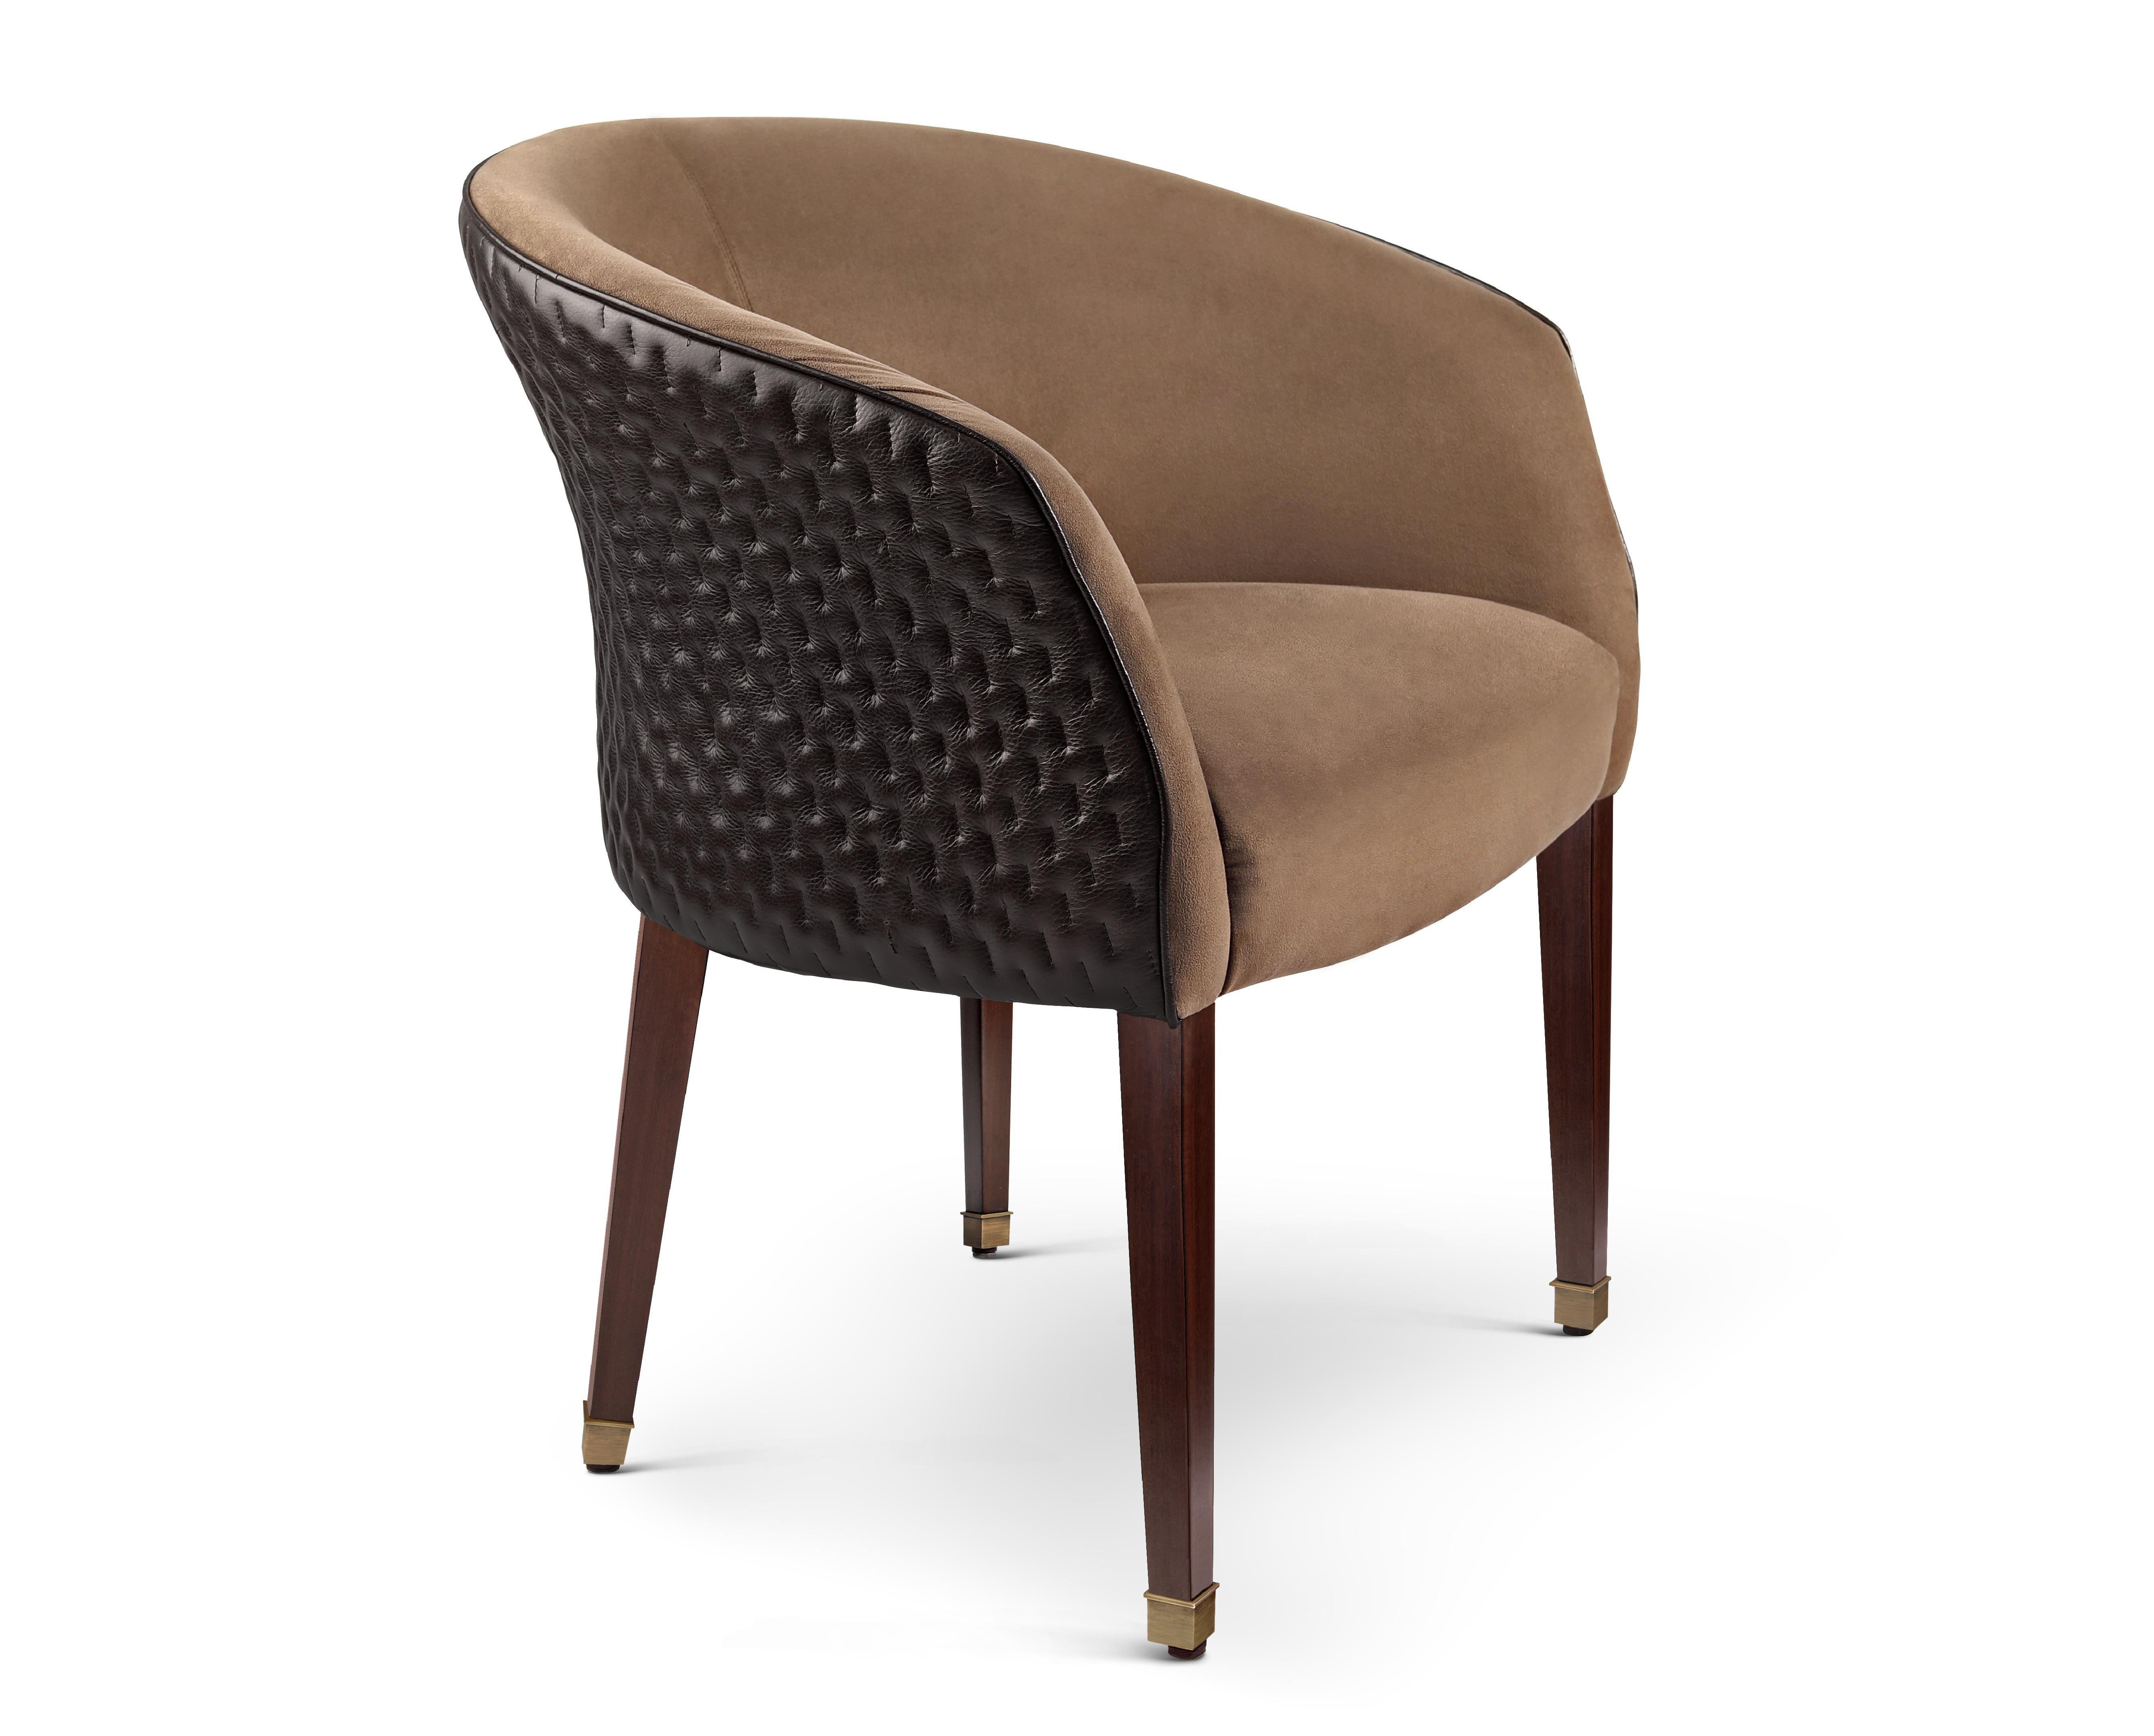 Hand stitched leather marla armchair by Madheke
Dimensions: W 60.8 x D 68 x H 80 cm.
Materials: Leather, Fabric, Wood, Metal.

The MARLA sets itself apart from its other contemporaries of the upholstery world with its precise attention to detail